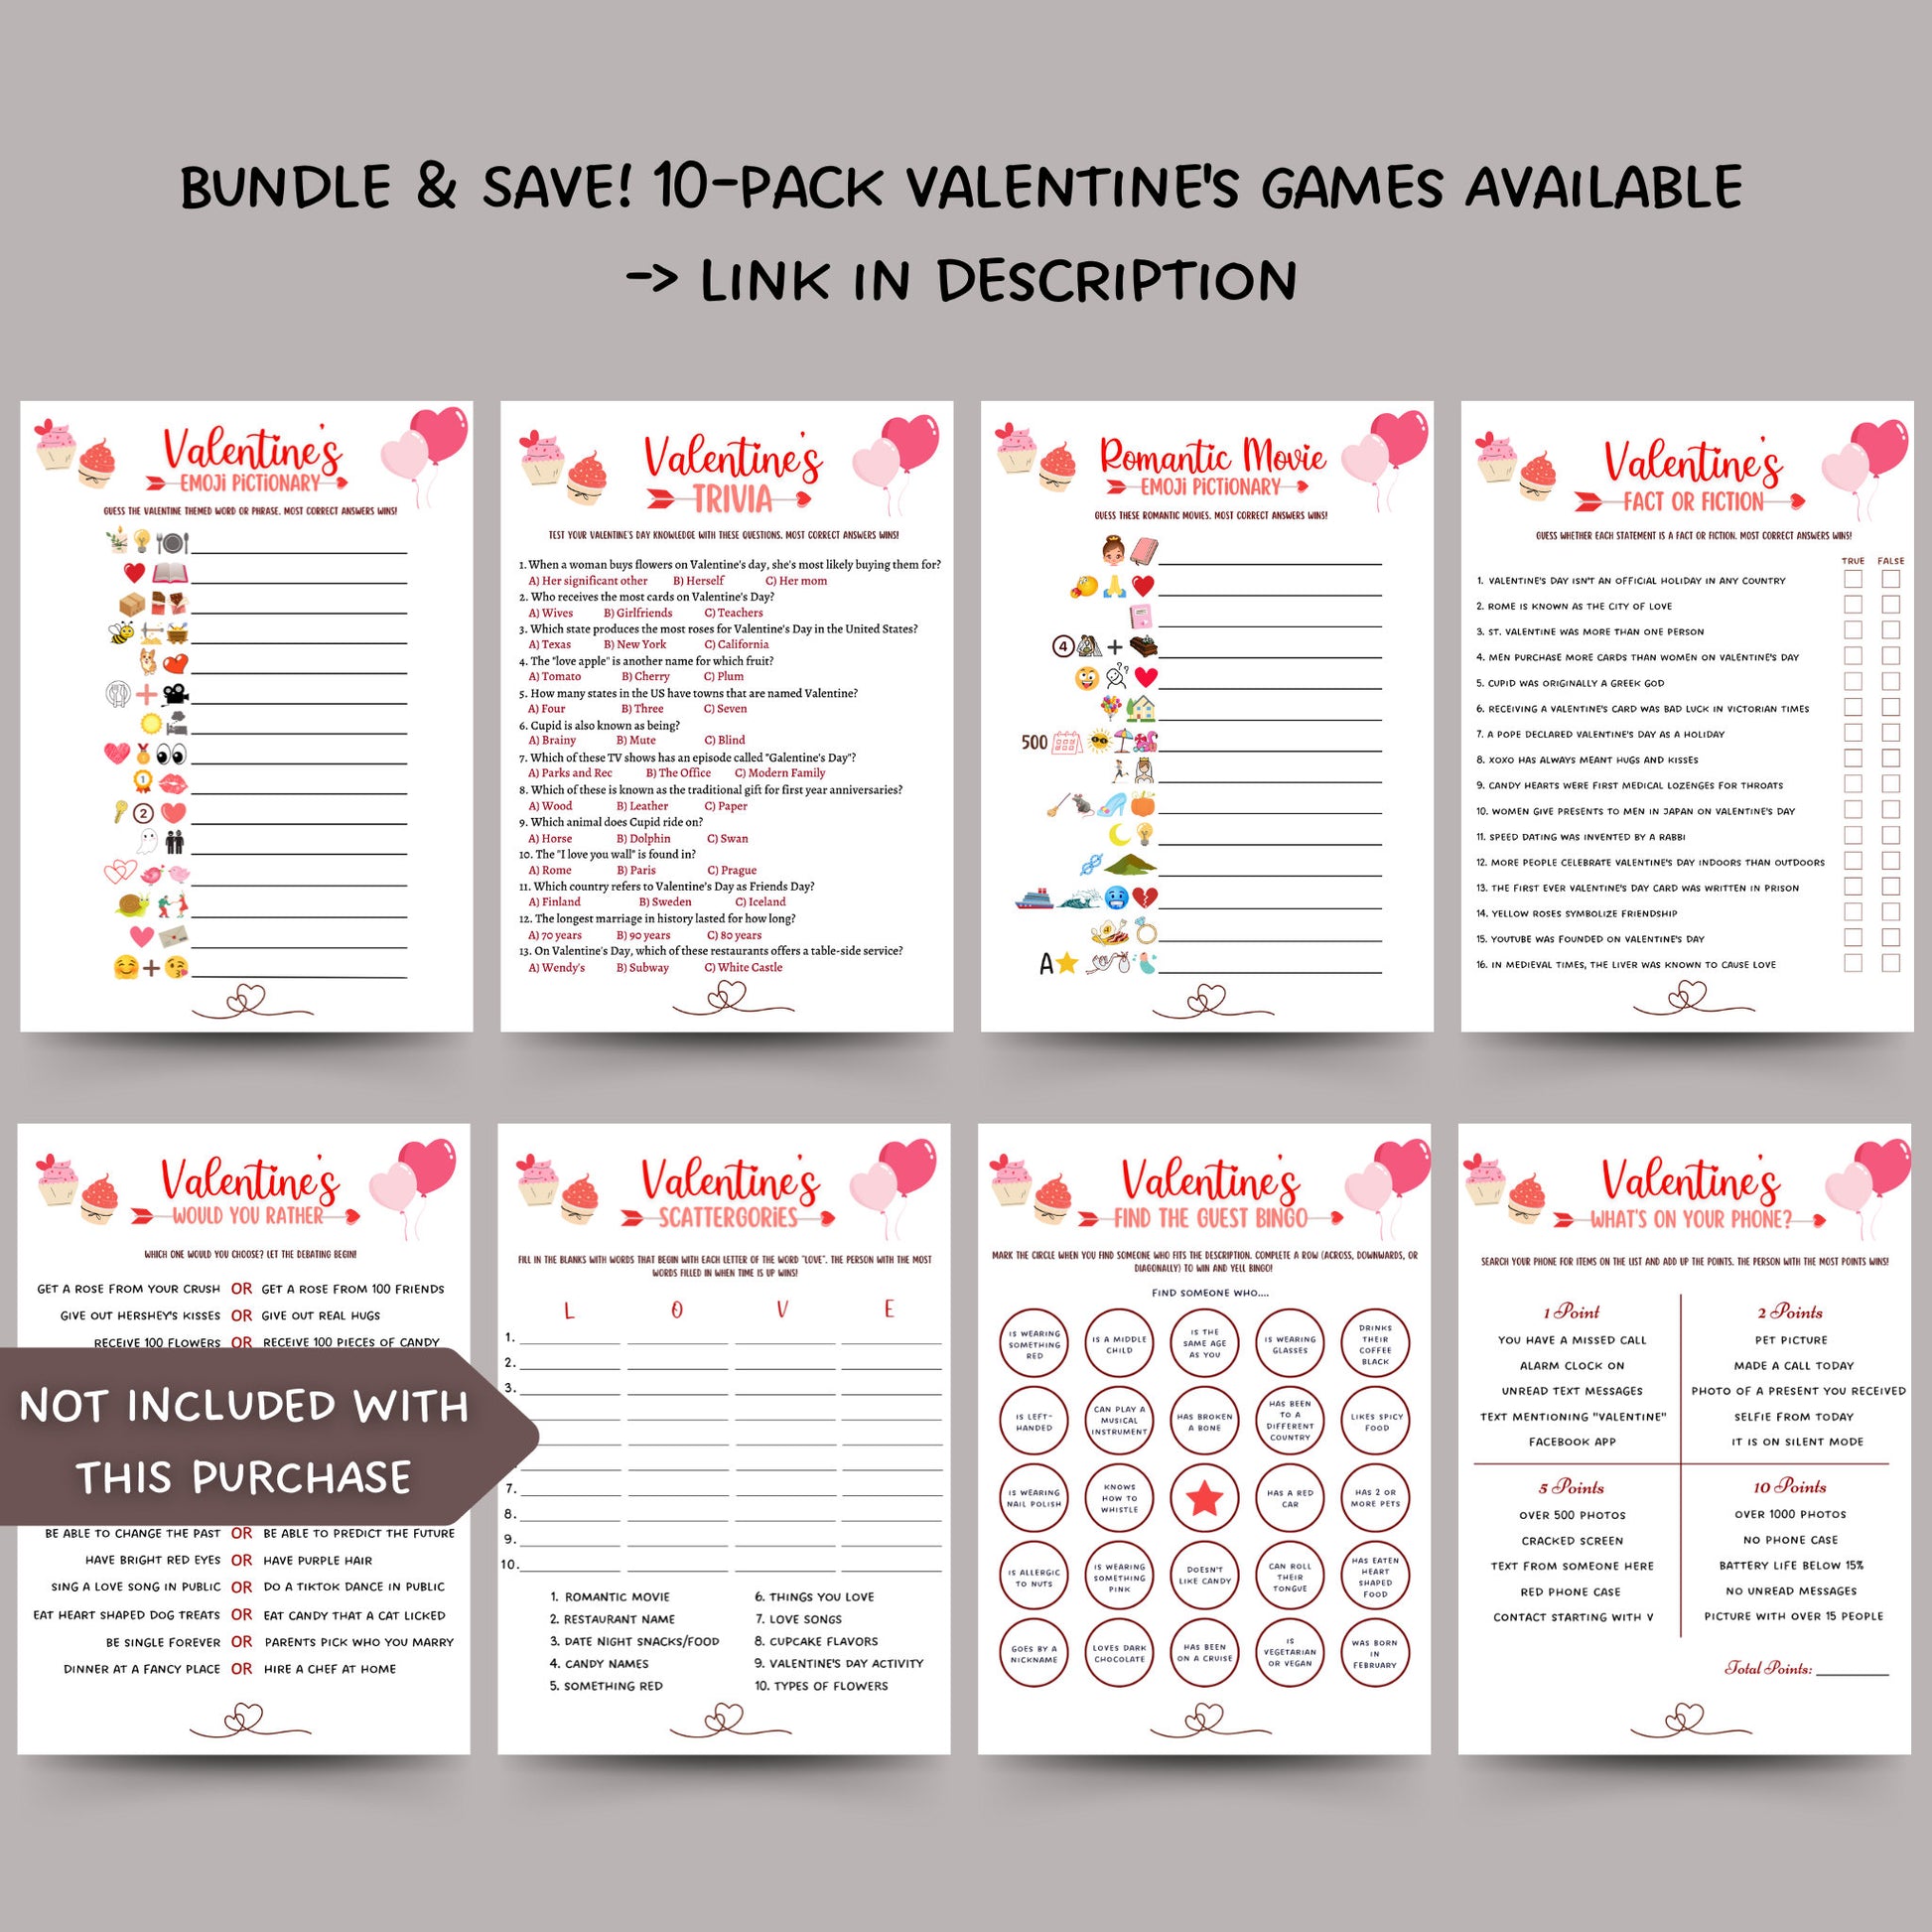 Valentine's Day Fact or Fiction Game Printable, Valentines Game True or False Trivia, Galentines Day Game, Party Game Activity, Adults/Kids